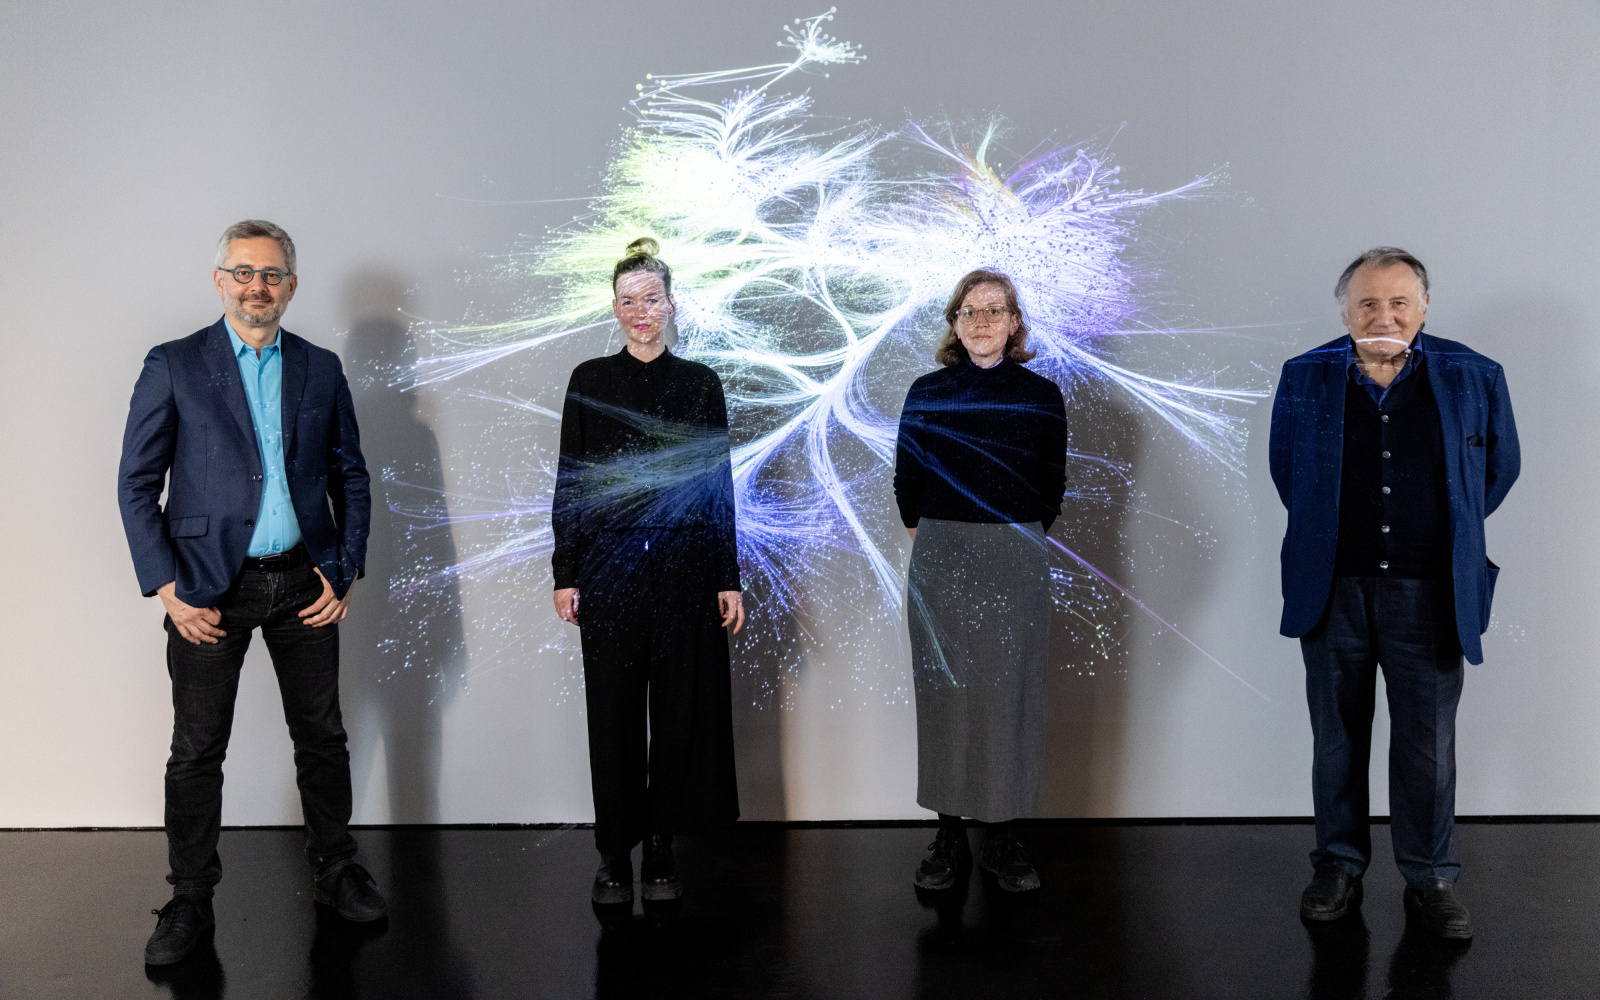 Four people stand in front of a projection of a network in the exhibition space. From left: Albert-László Barabási, Clara Runge, Teresa Retzer and Peter Weibel.